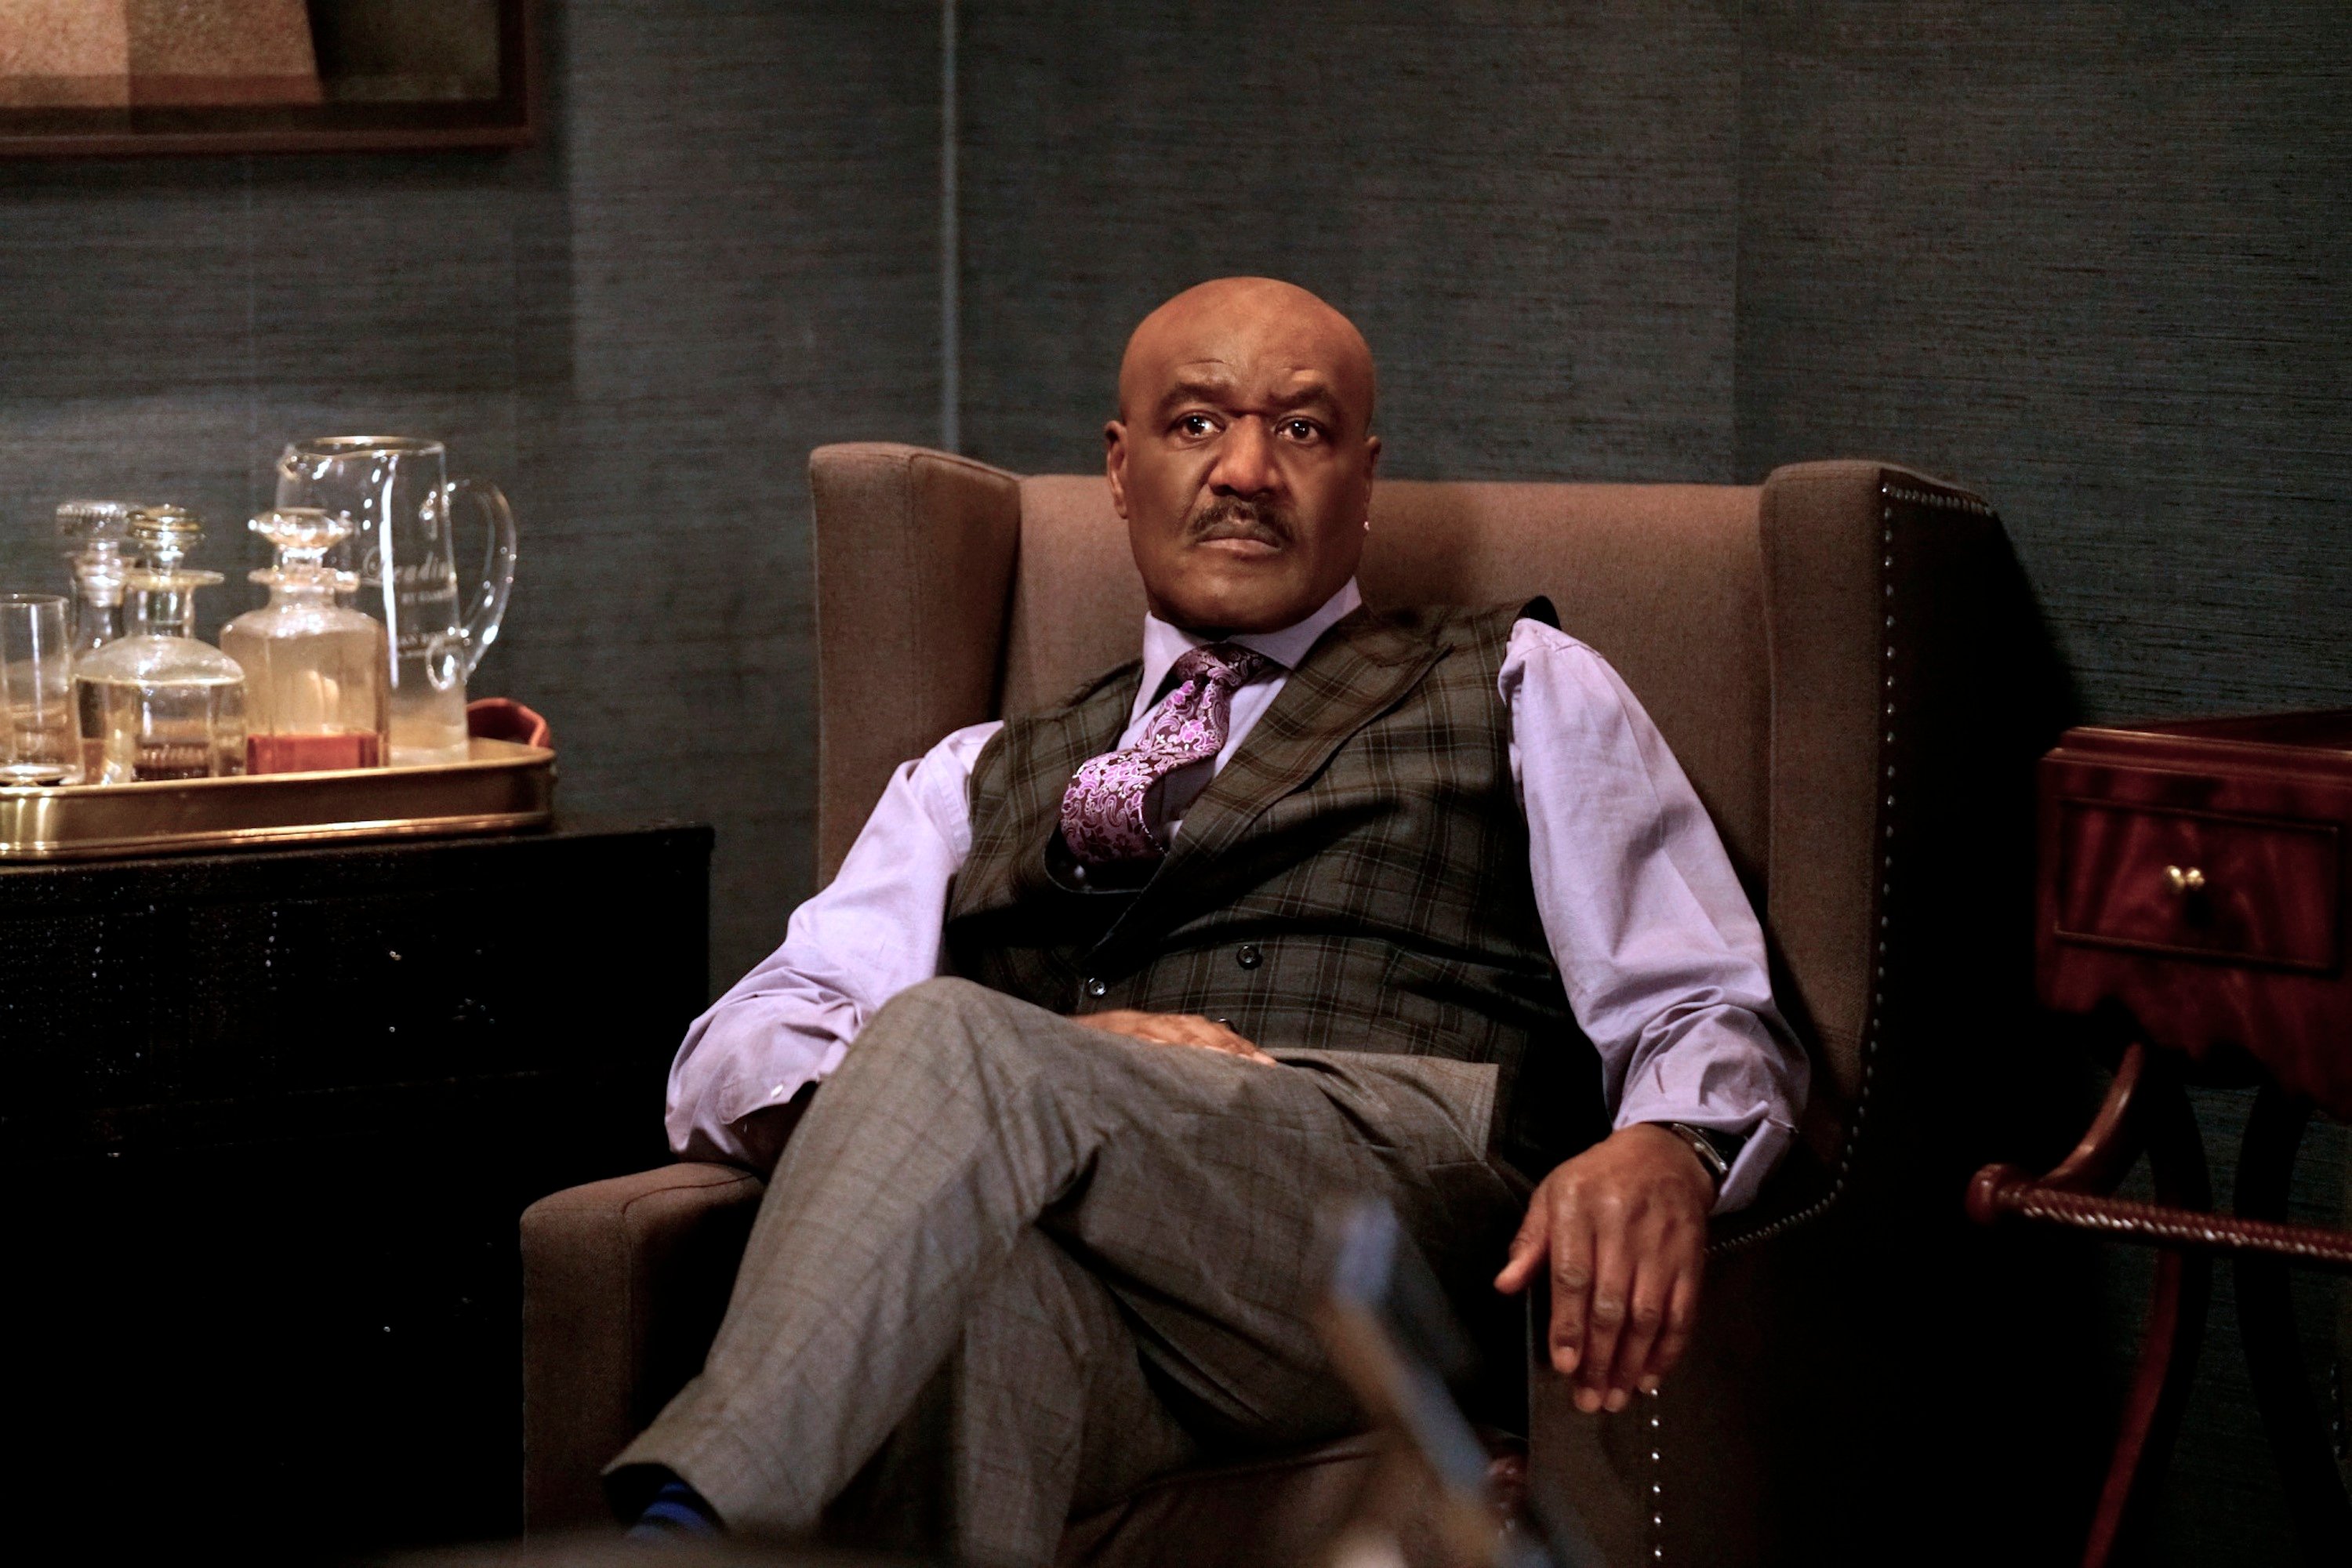 Delroy Lindo as Adrian Boseman on CBS's "The Good Fight"